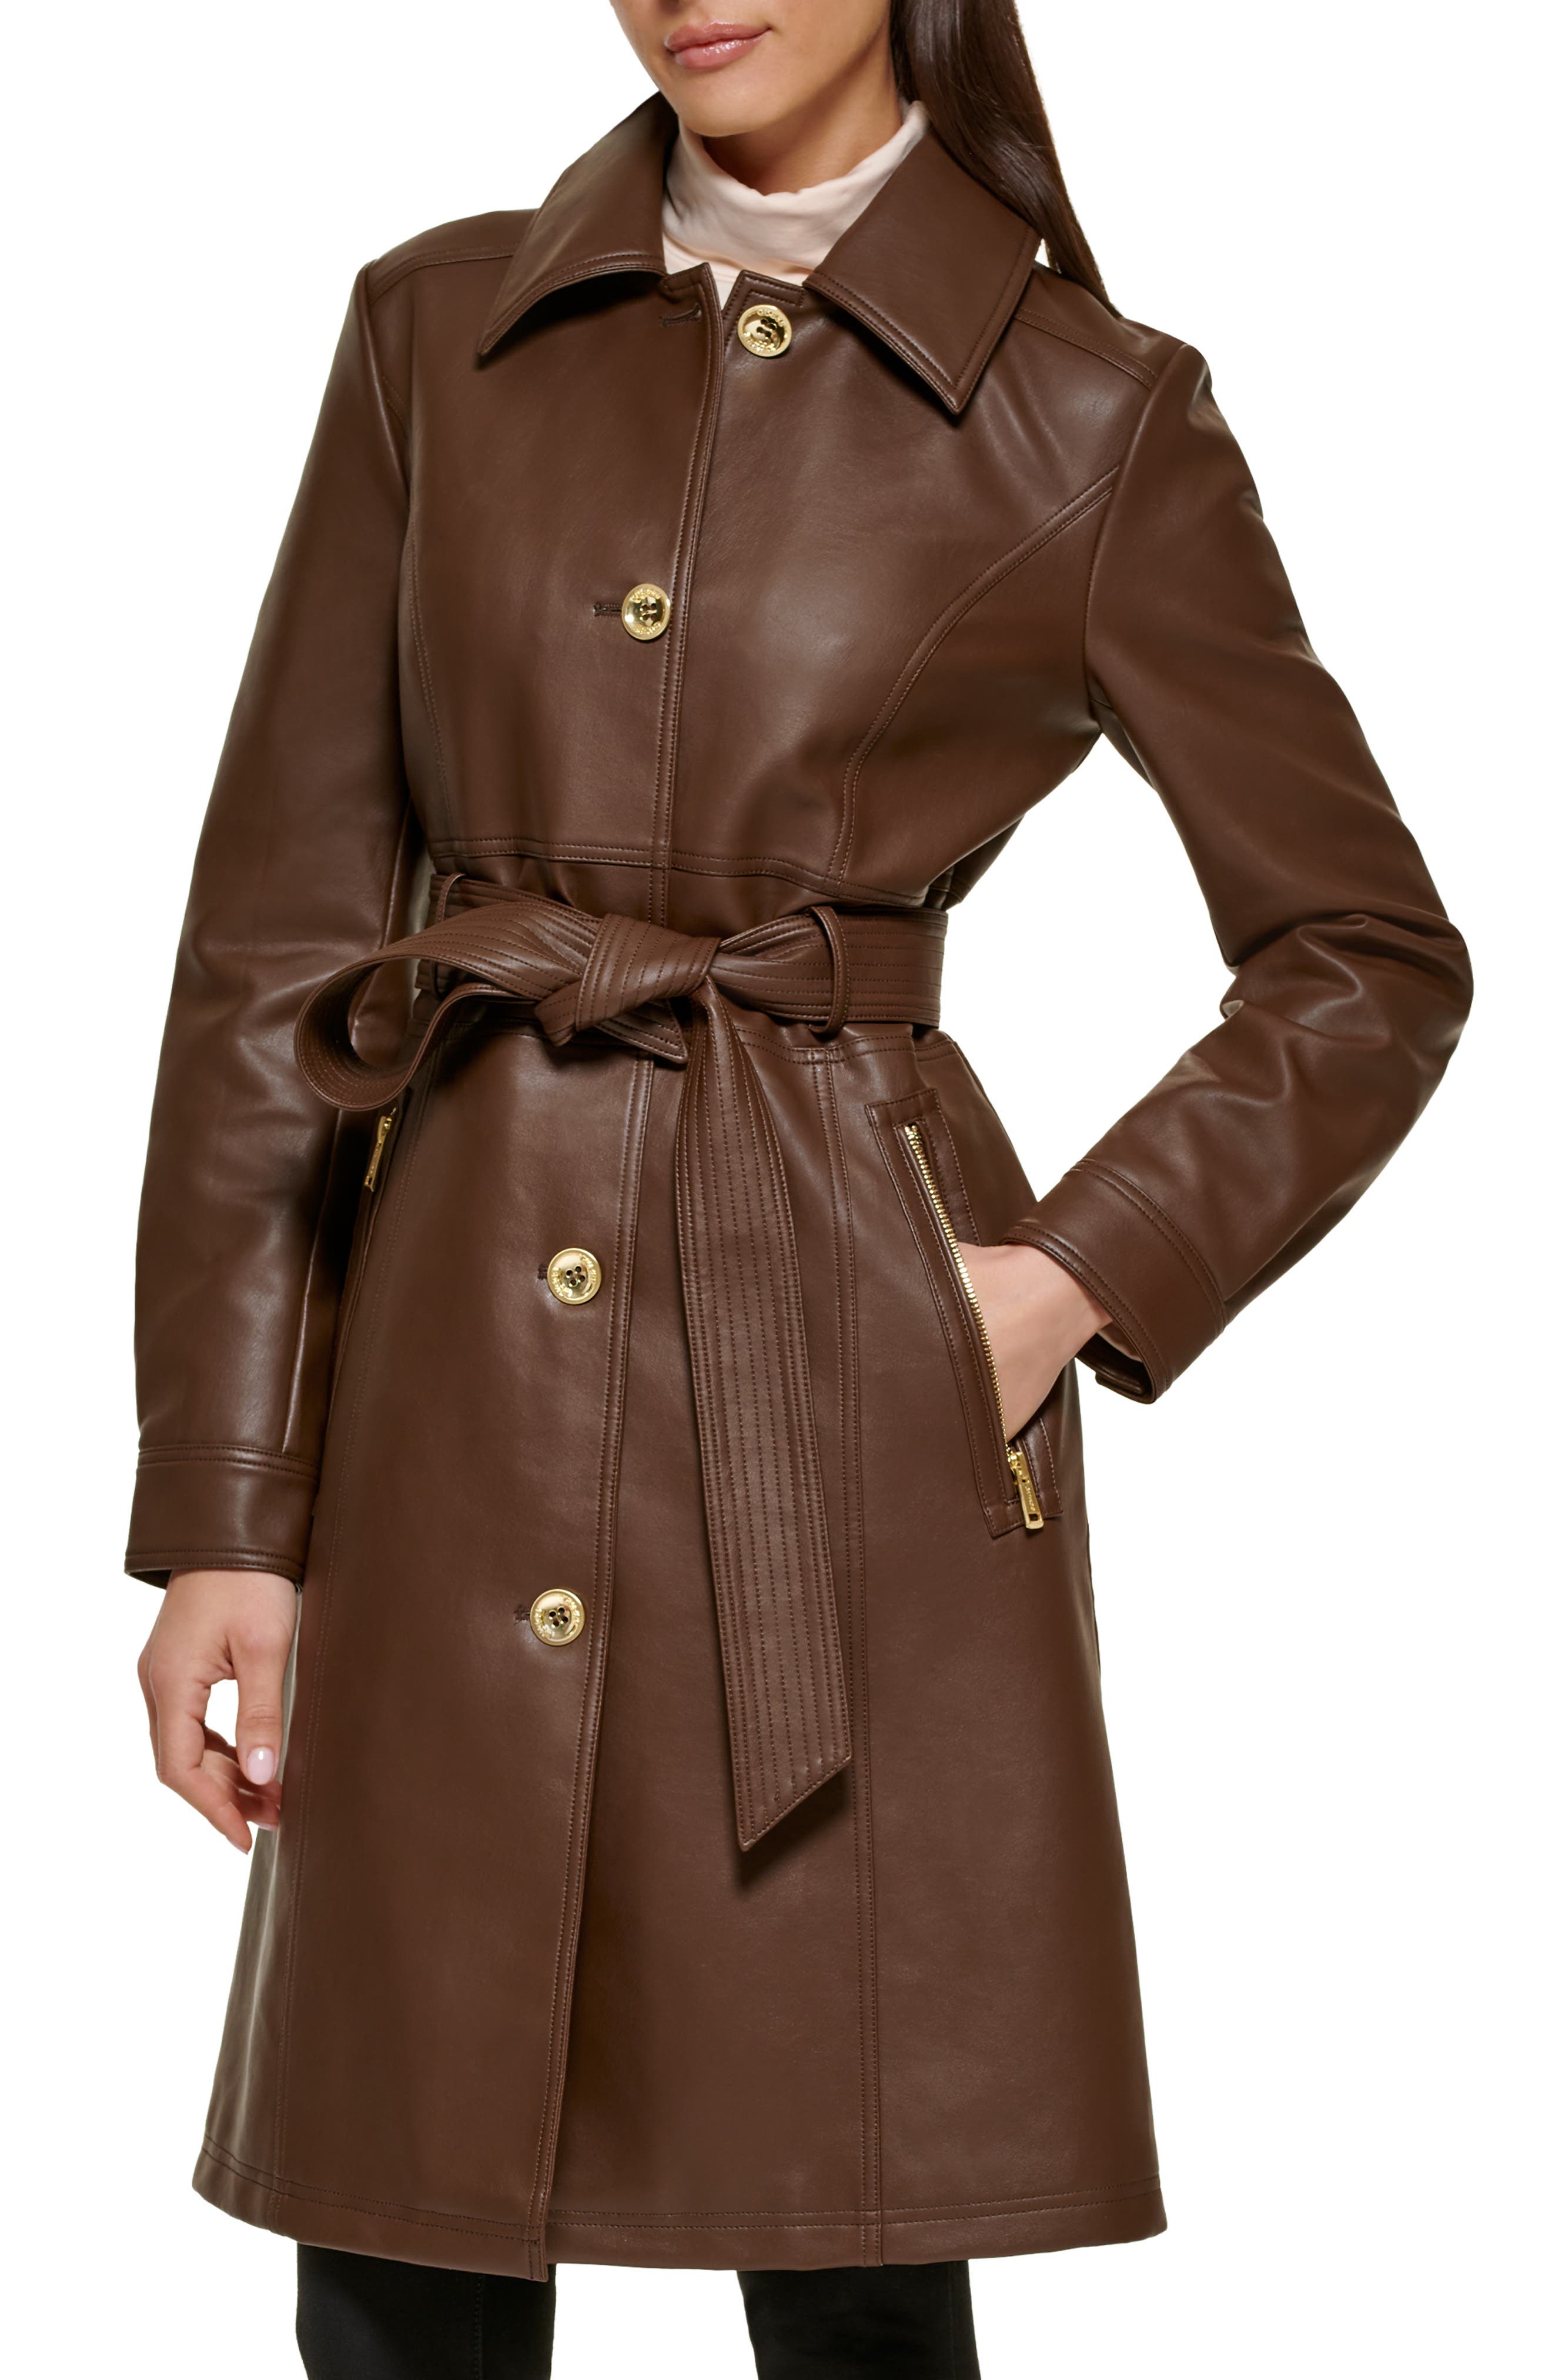 Her lip to Belted Dress Trench Coat